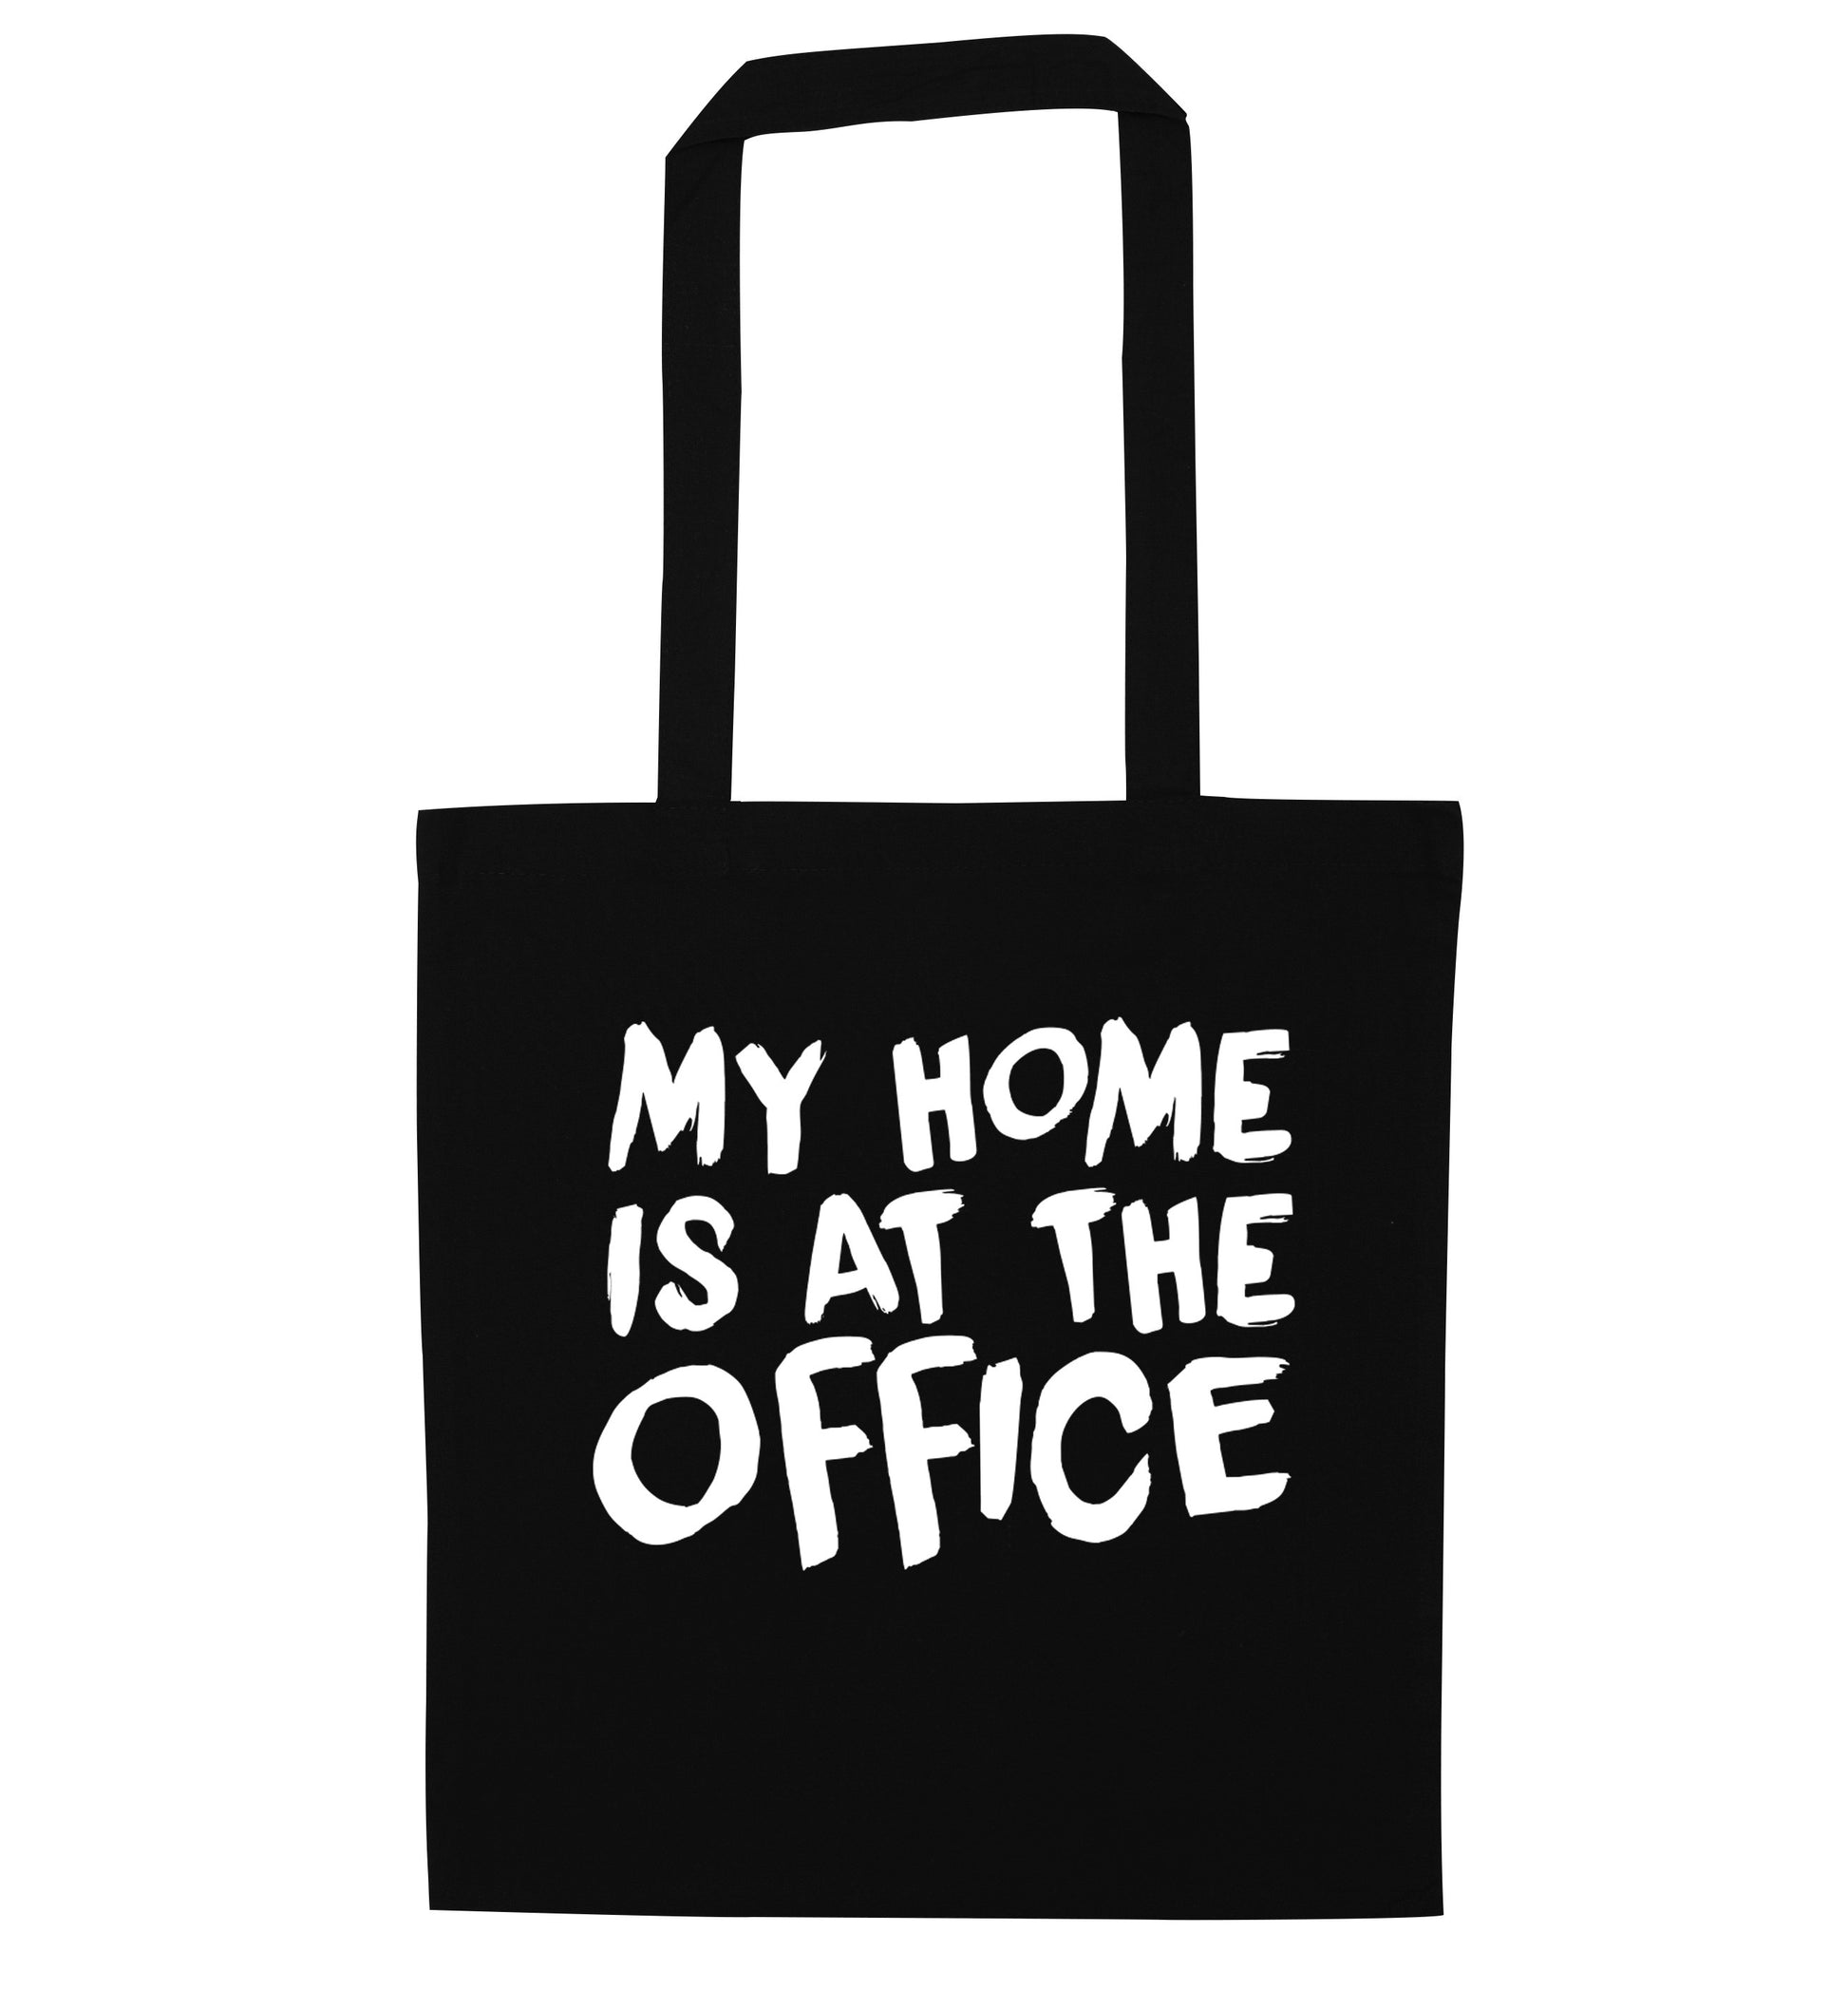 My home is at the office black tote bag